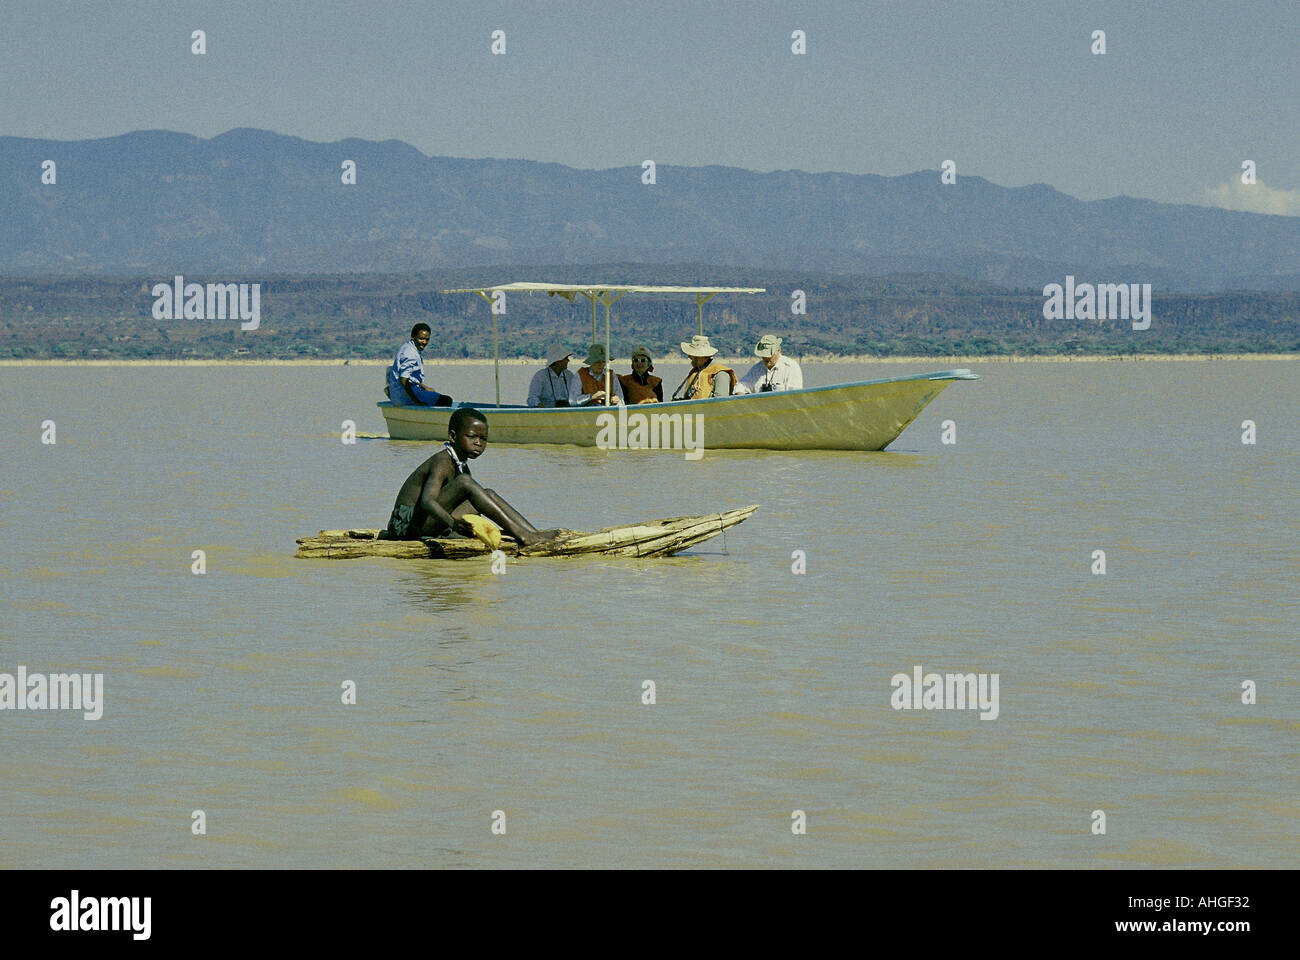 Tourists in a motor boat near young Njemps boy riding on his Ambach canoe on Lake Baringo in the Great Rift Valley Kenya East Stock Photo